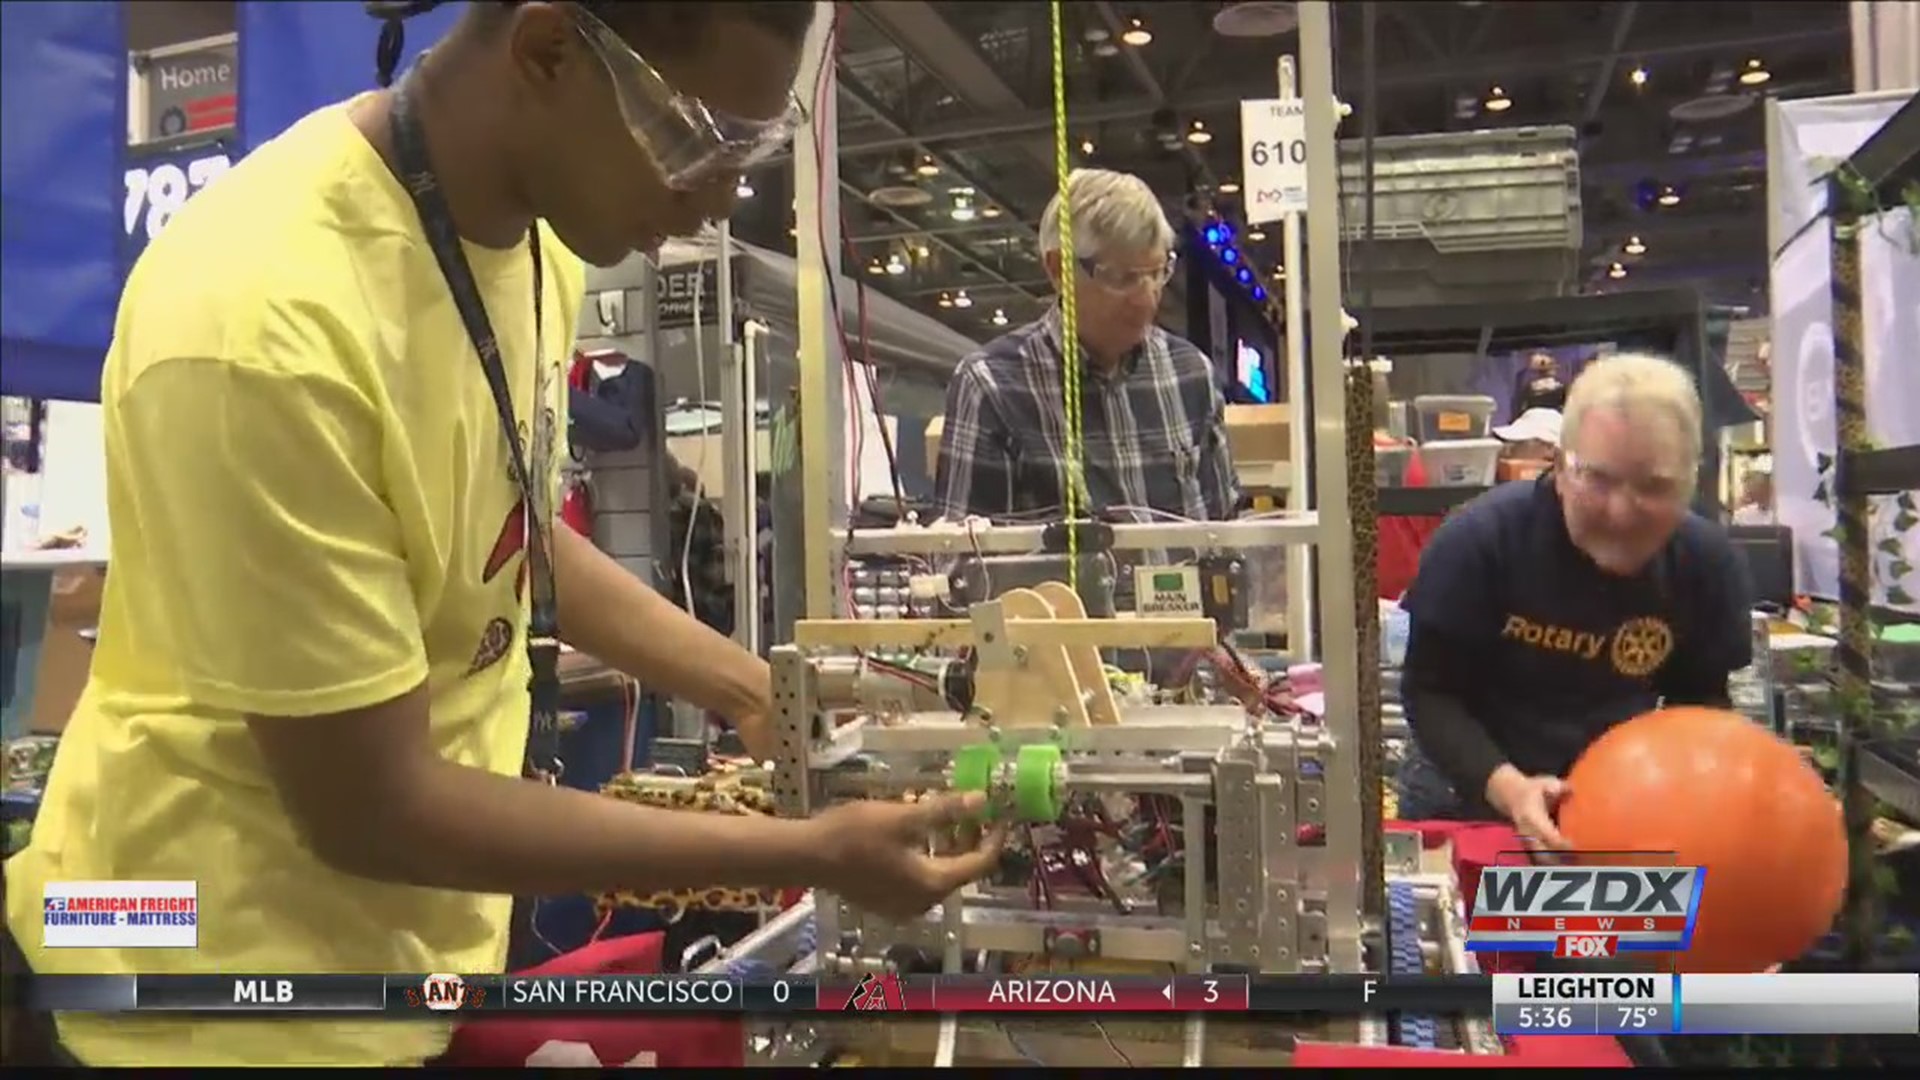 Hundreds of high school engineers from around the country are in Huntsville today for a regional robotics competition.